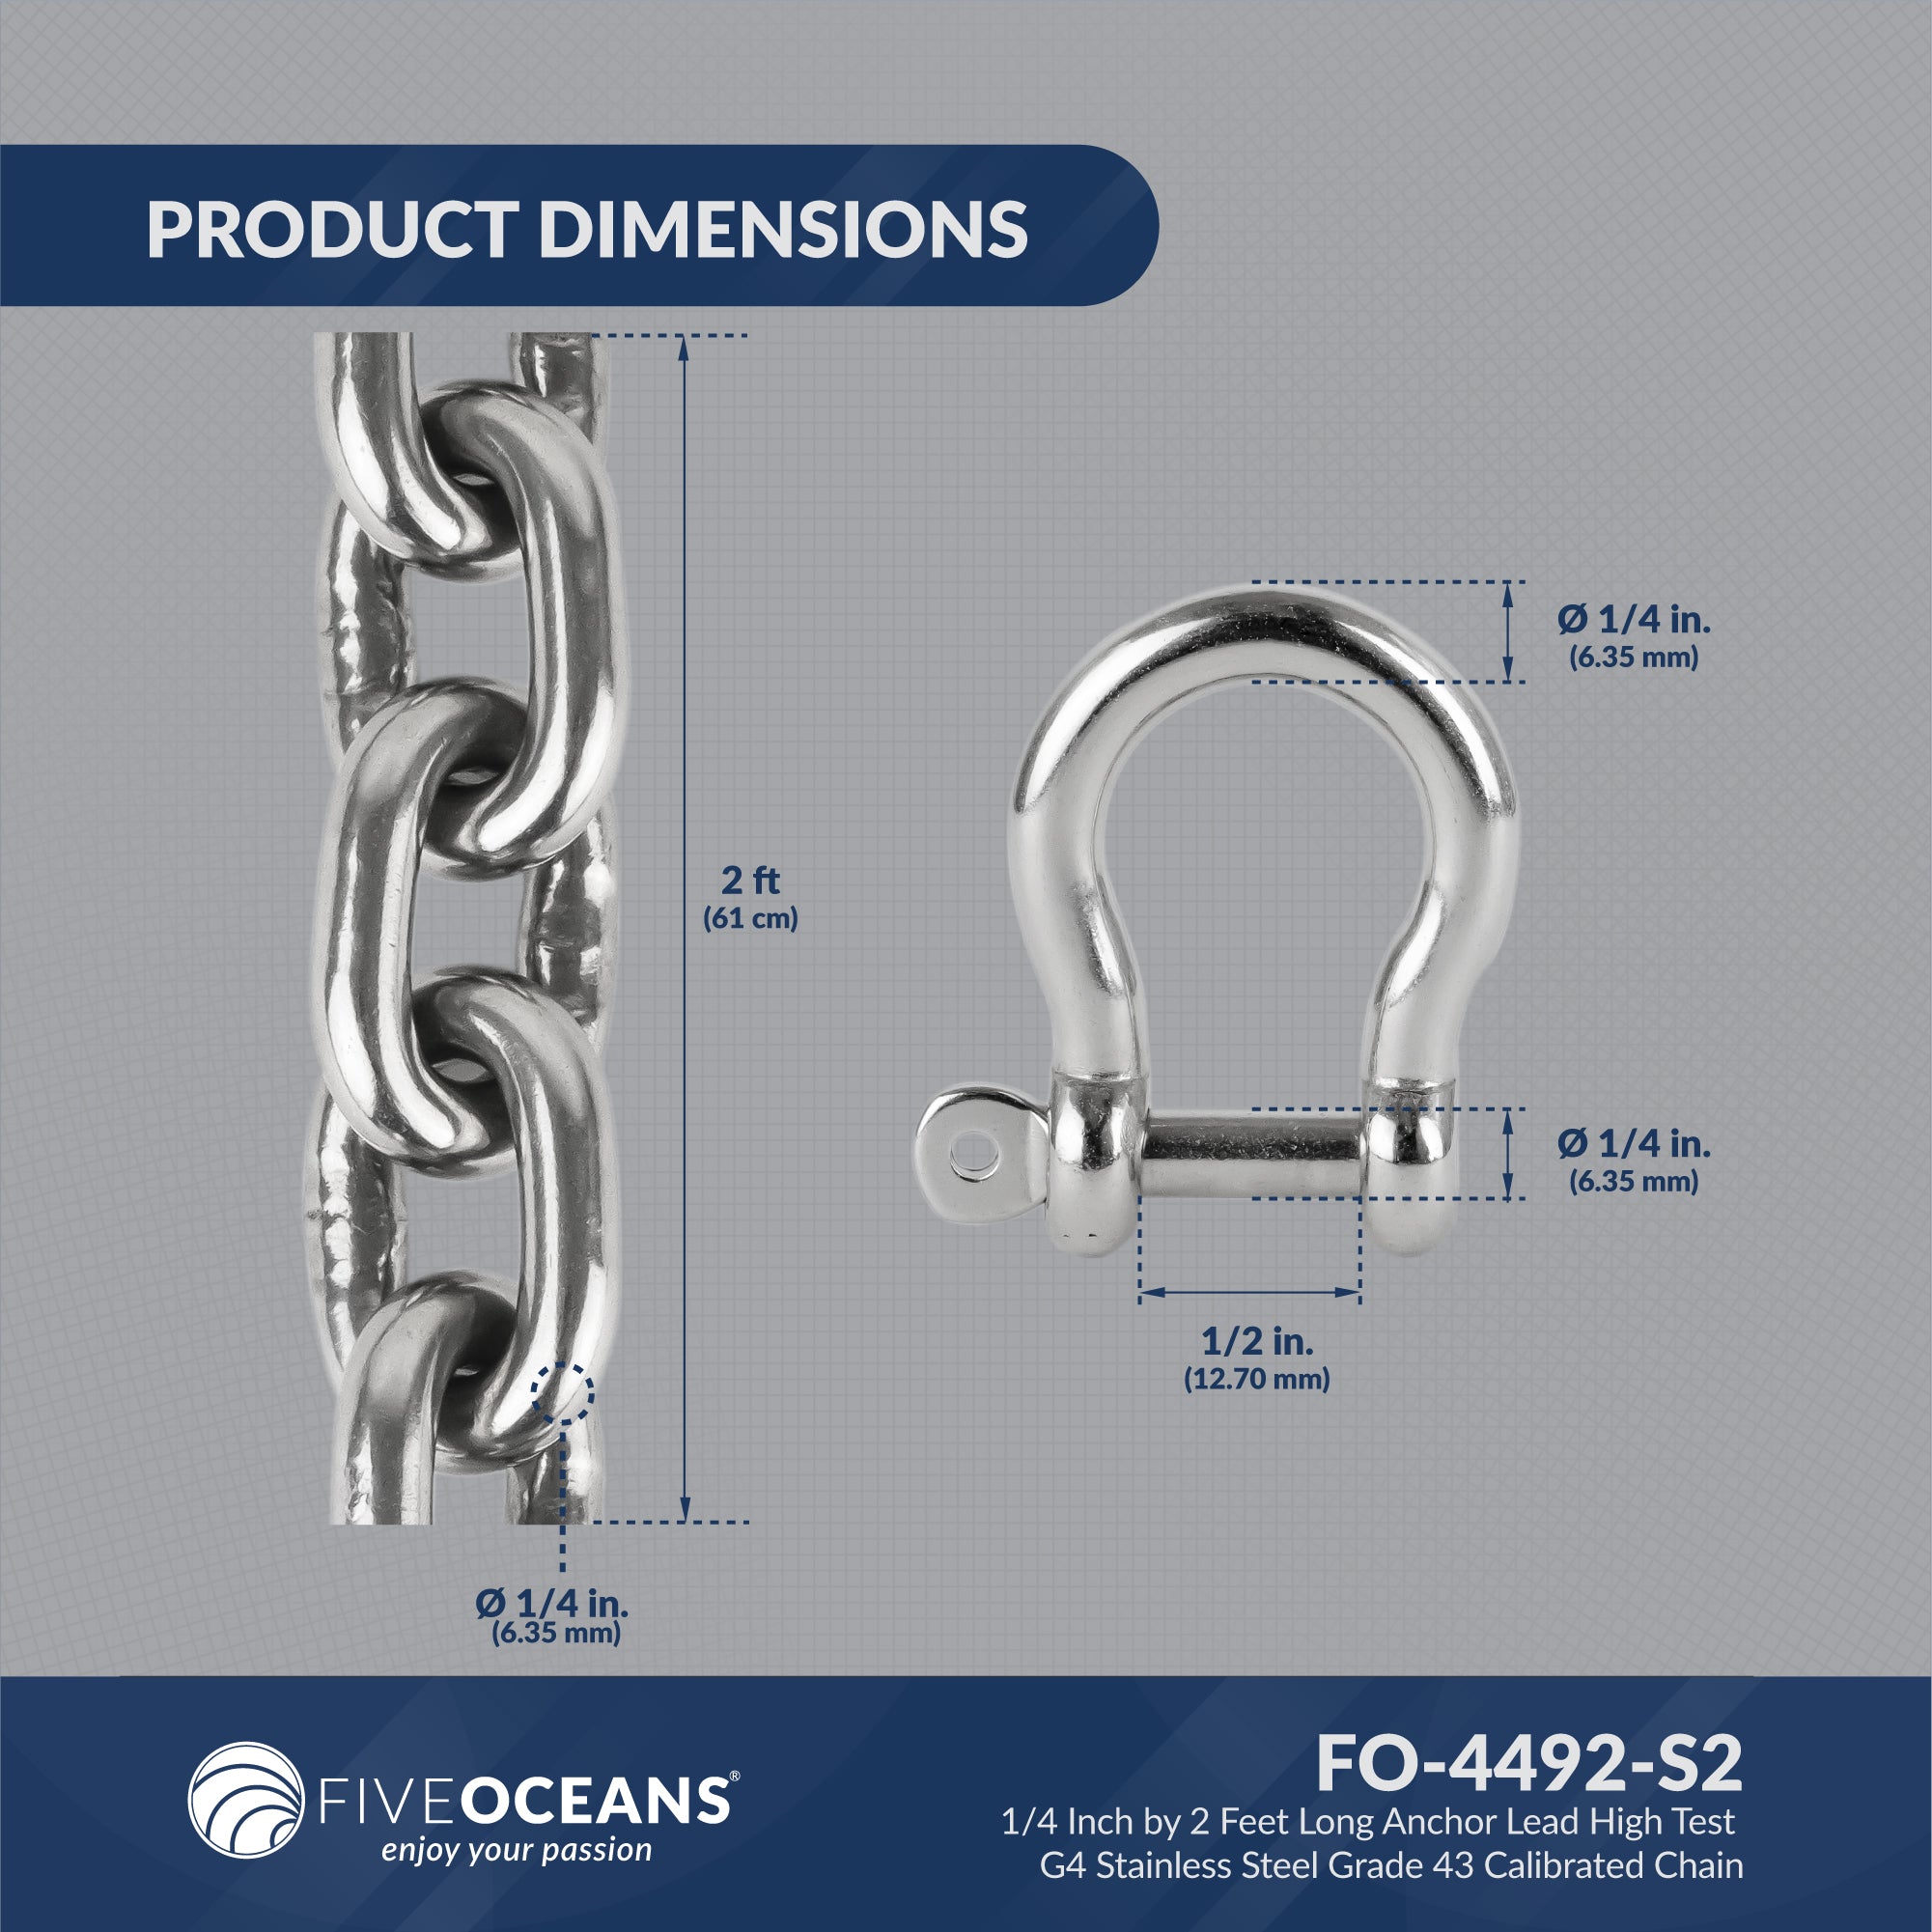 Anchor Lead Chain 1/4" x 2', HTG4 Stainless Steel - FO4492-S2